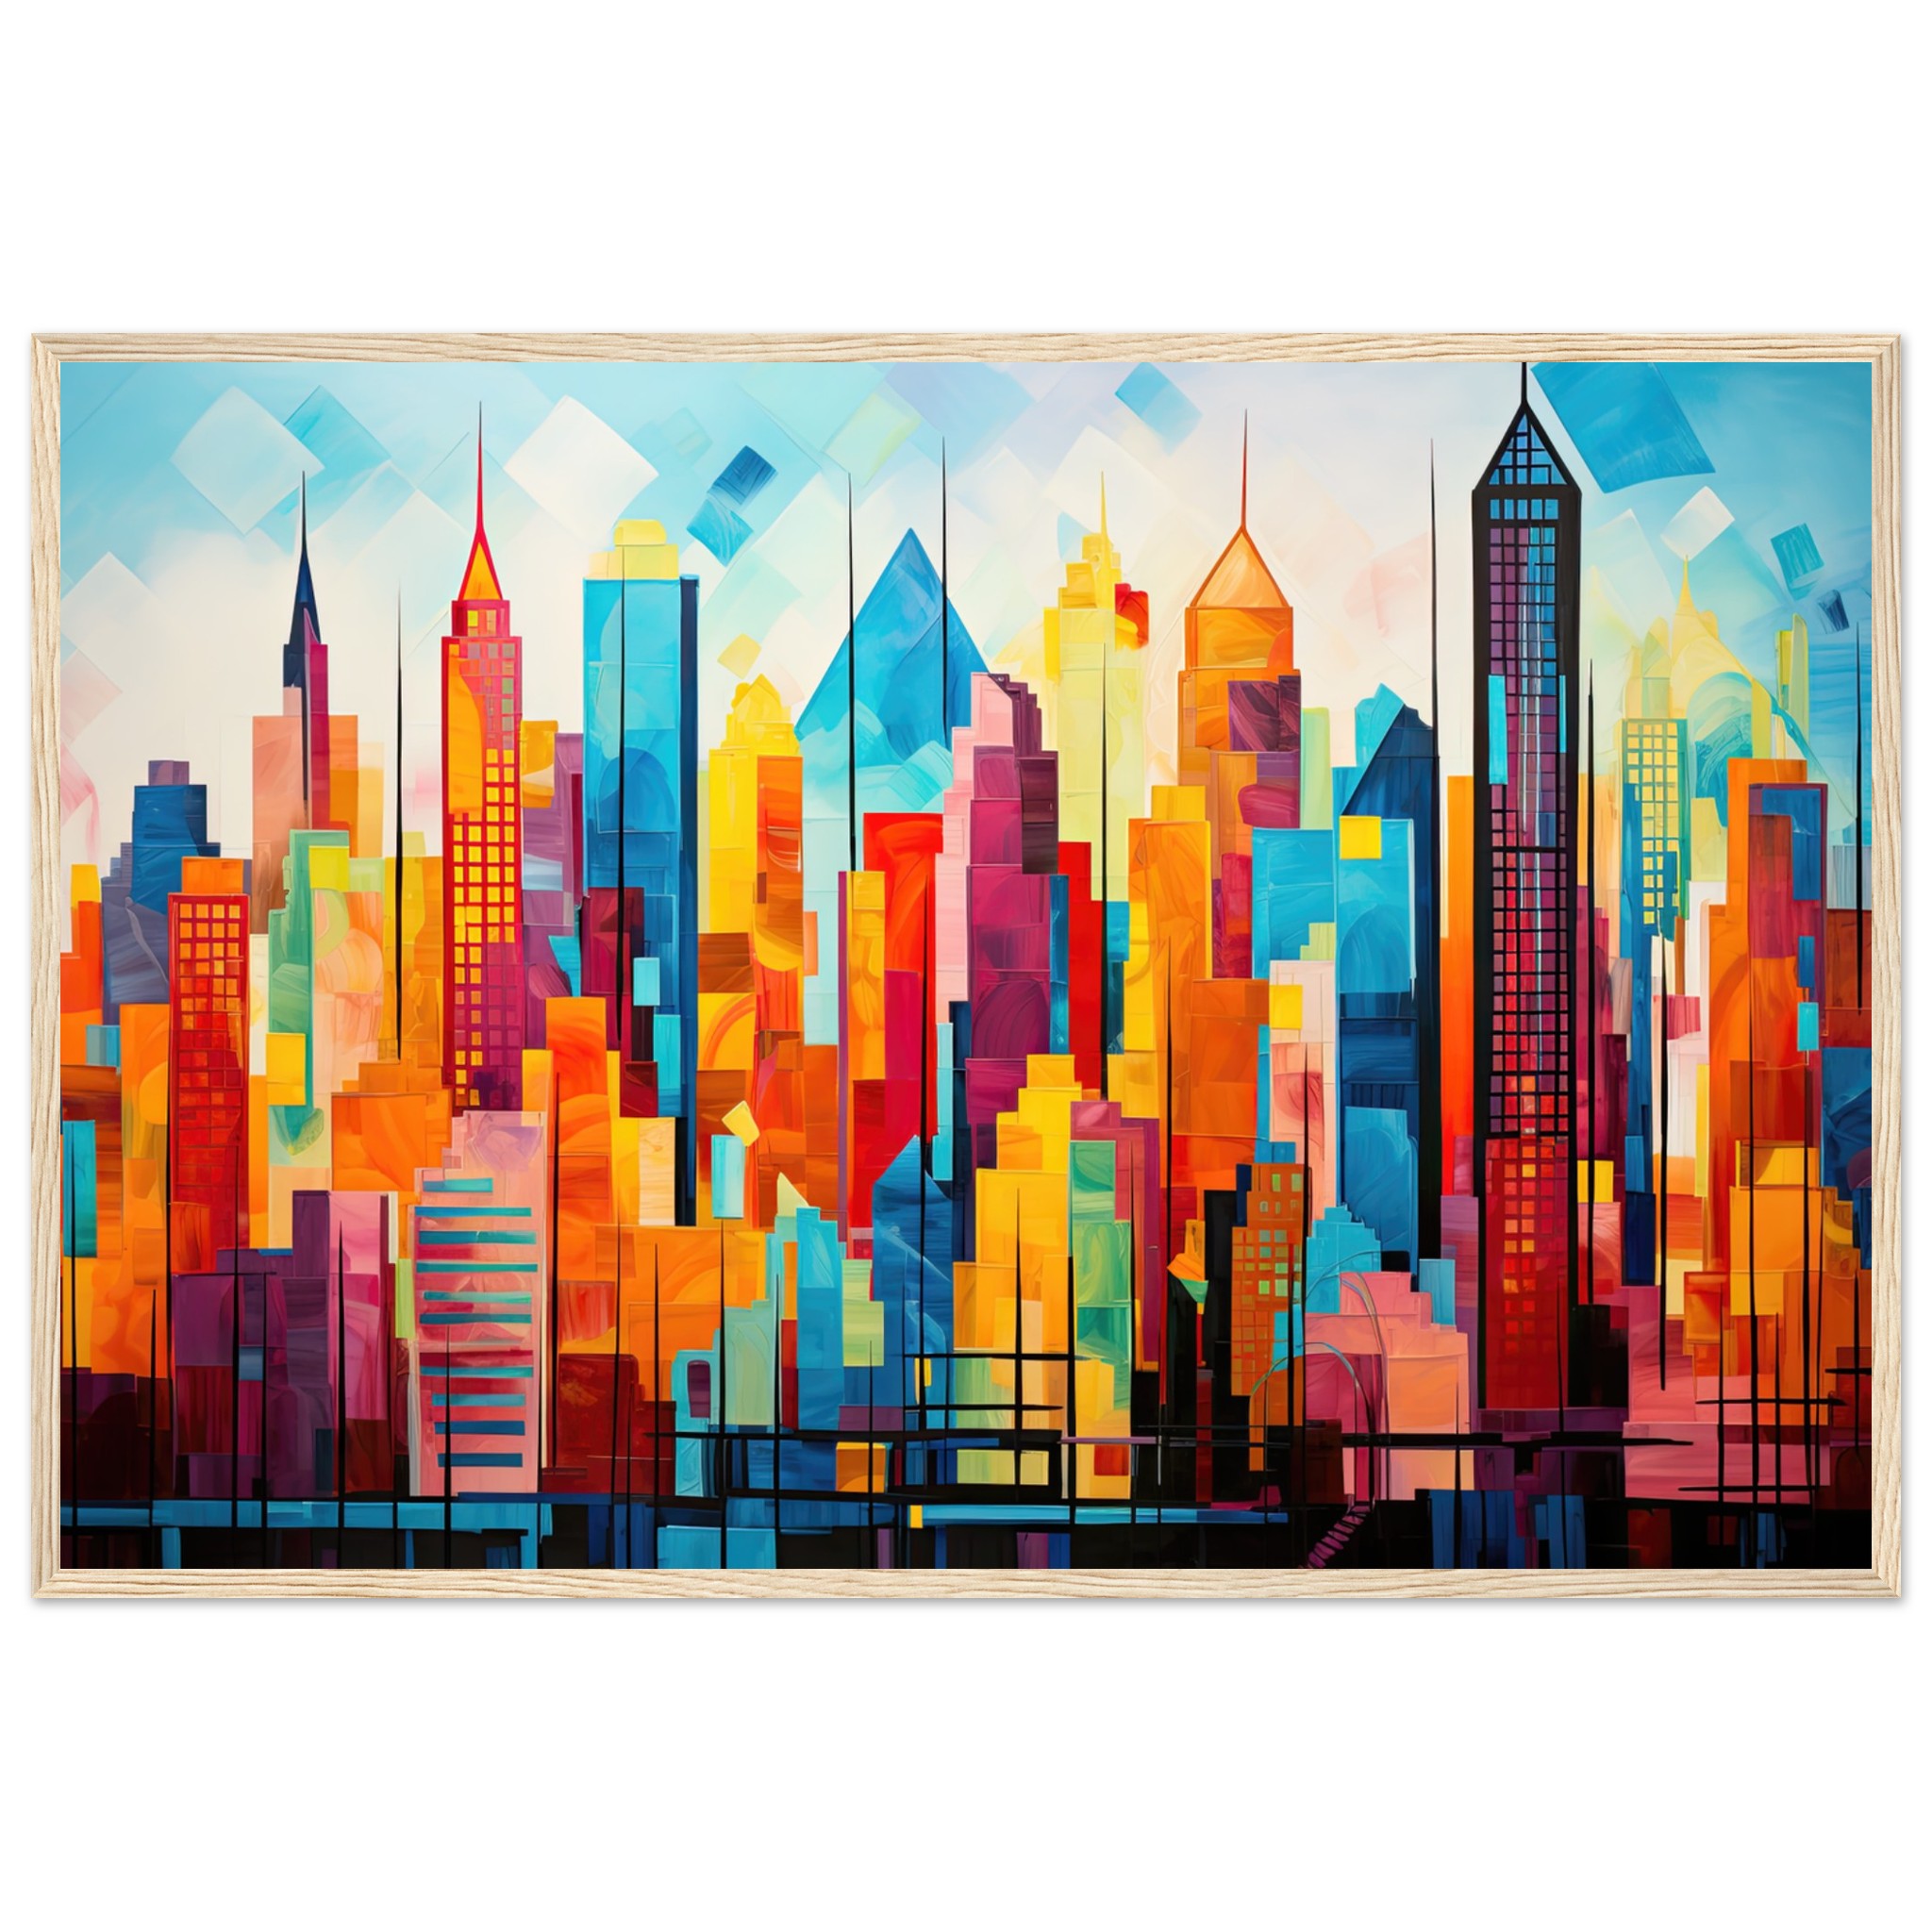 Colorful Abstract Cityscape Painted - Framed Print